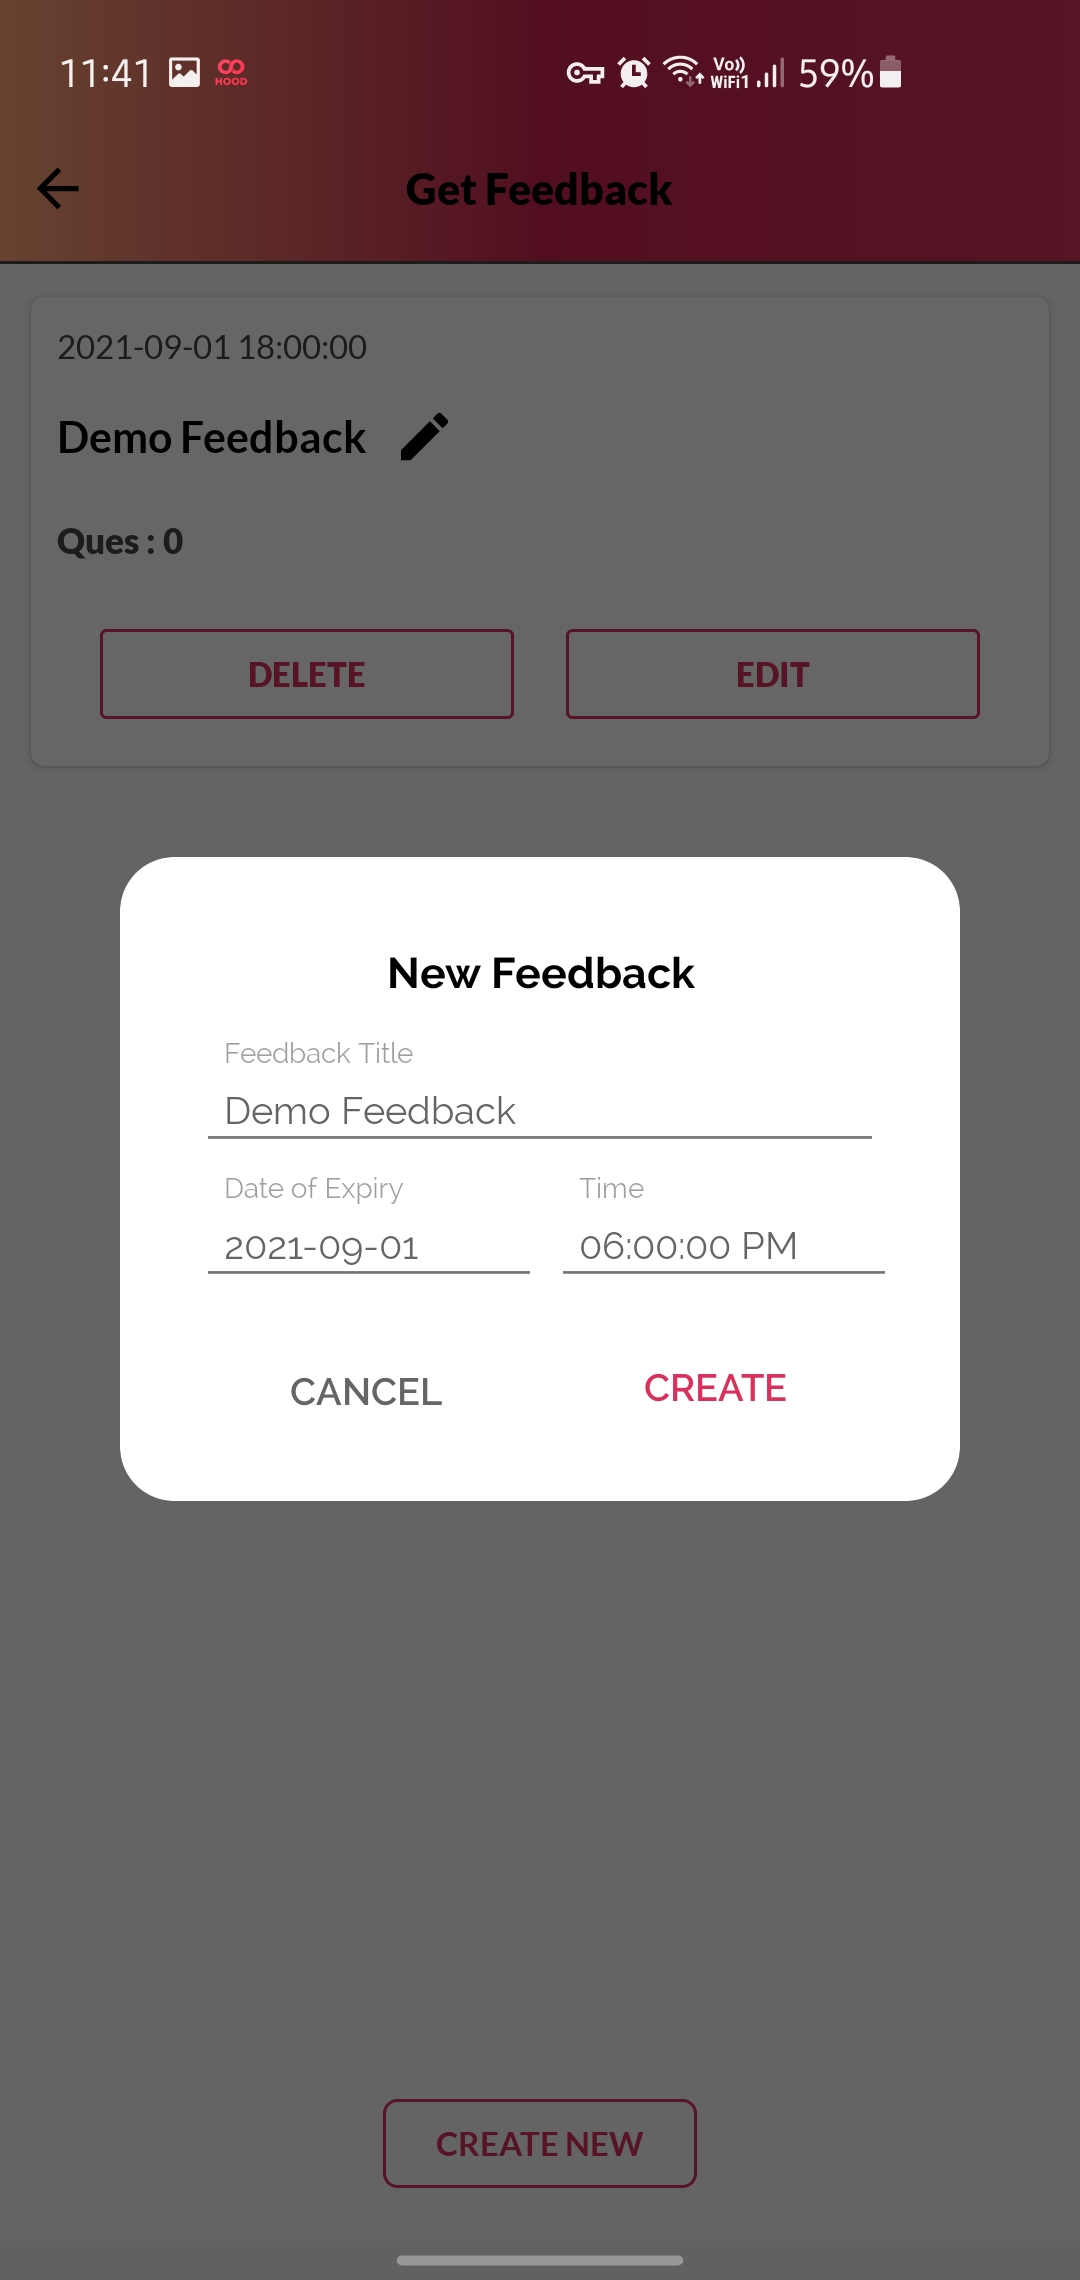 5.Once all the details are filled in, please tap on “Create” to successfully create and save a Feedback Form.